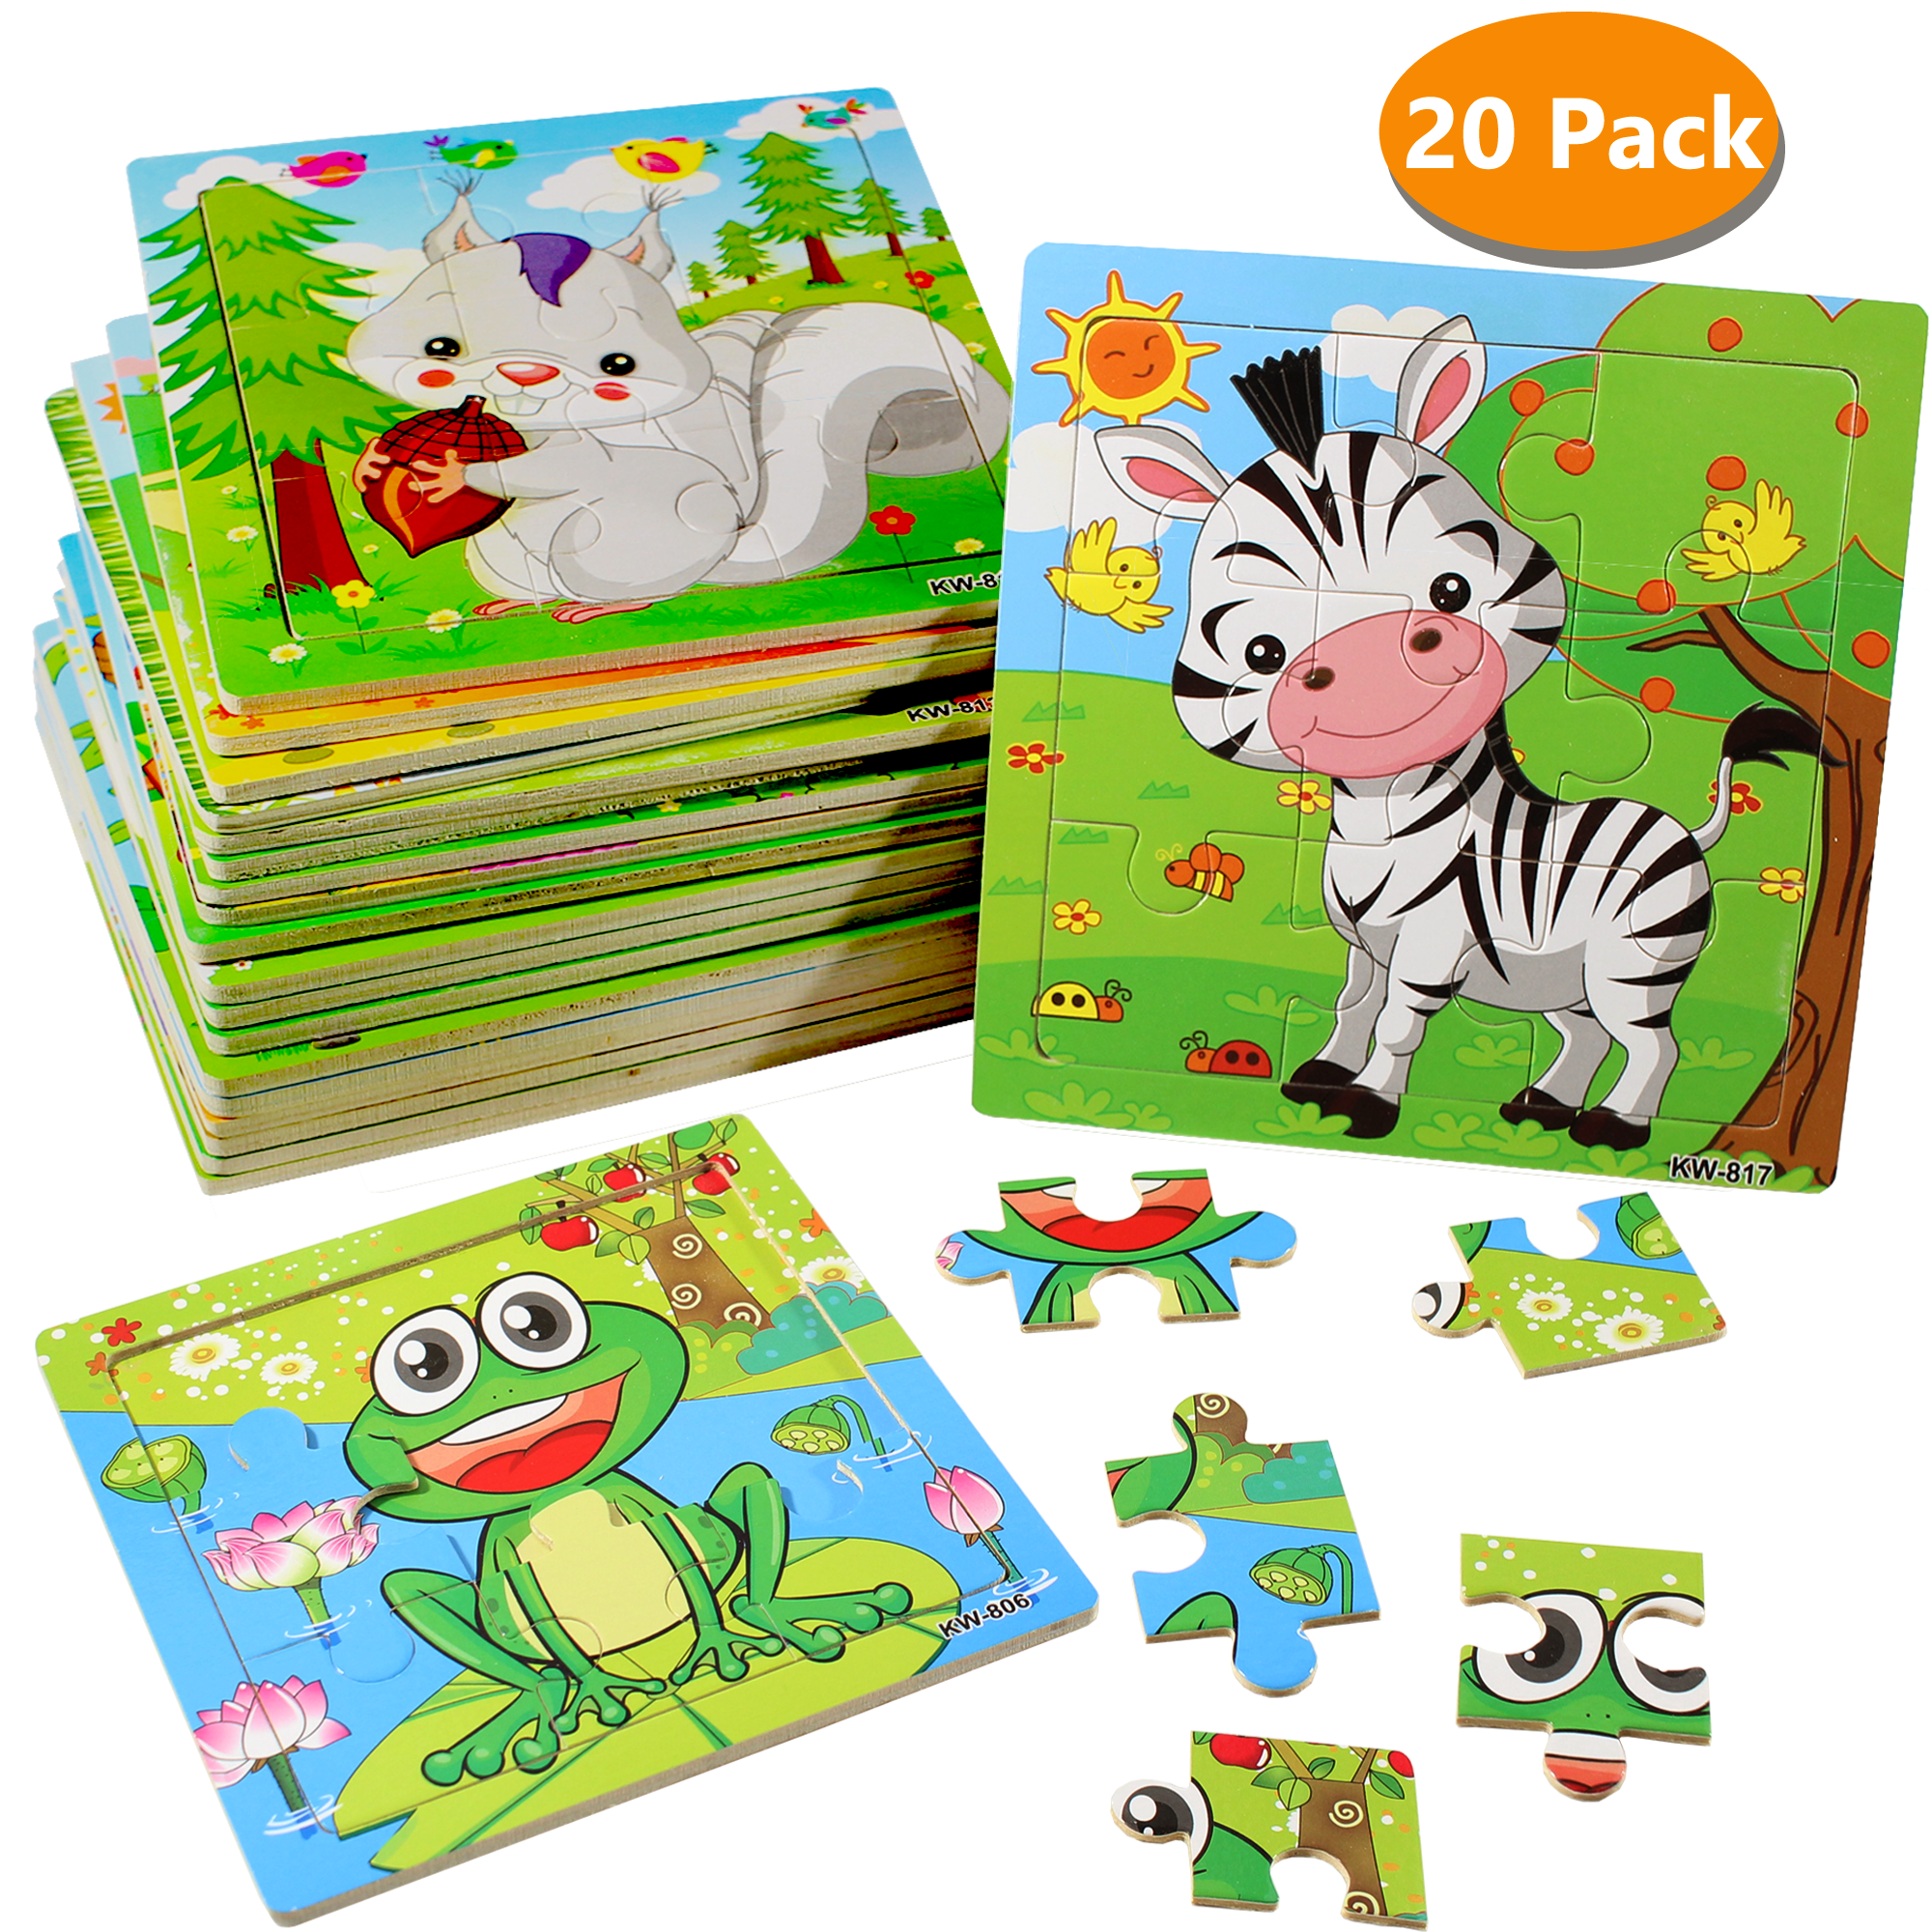 Wooden Jigsaw Puzzles Animal and Alphabet Puzzle Early Learning Educational Toy Gift for 1 2 3 4 5 Years Old Boys Girls